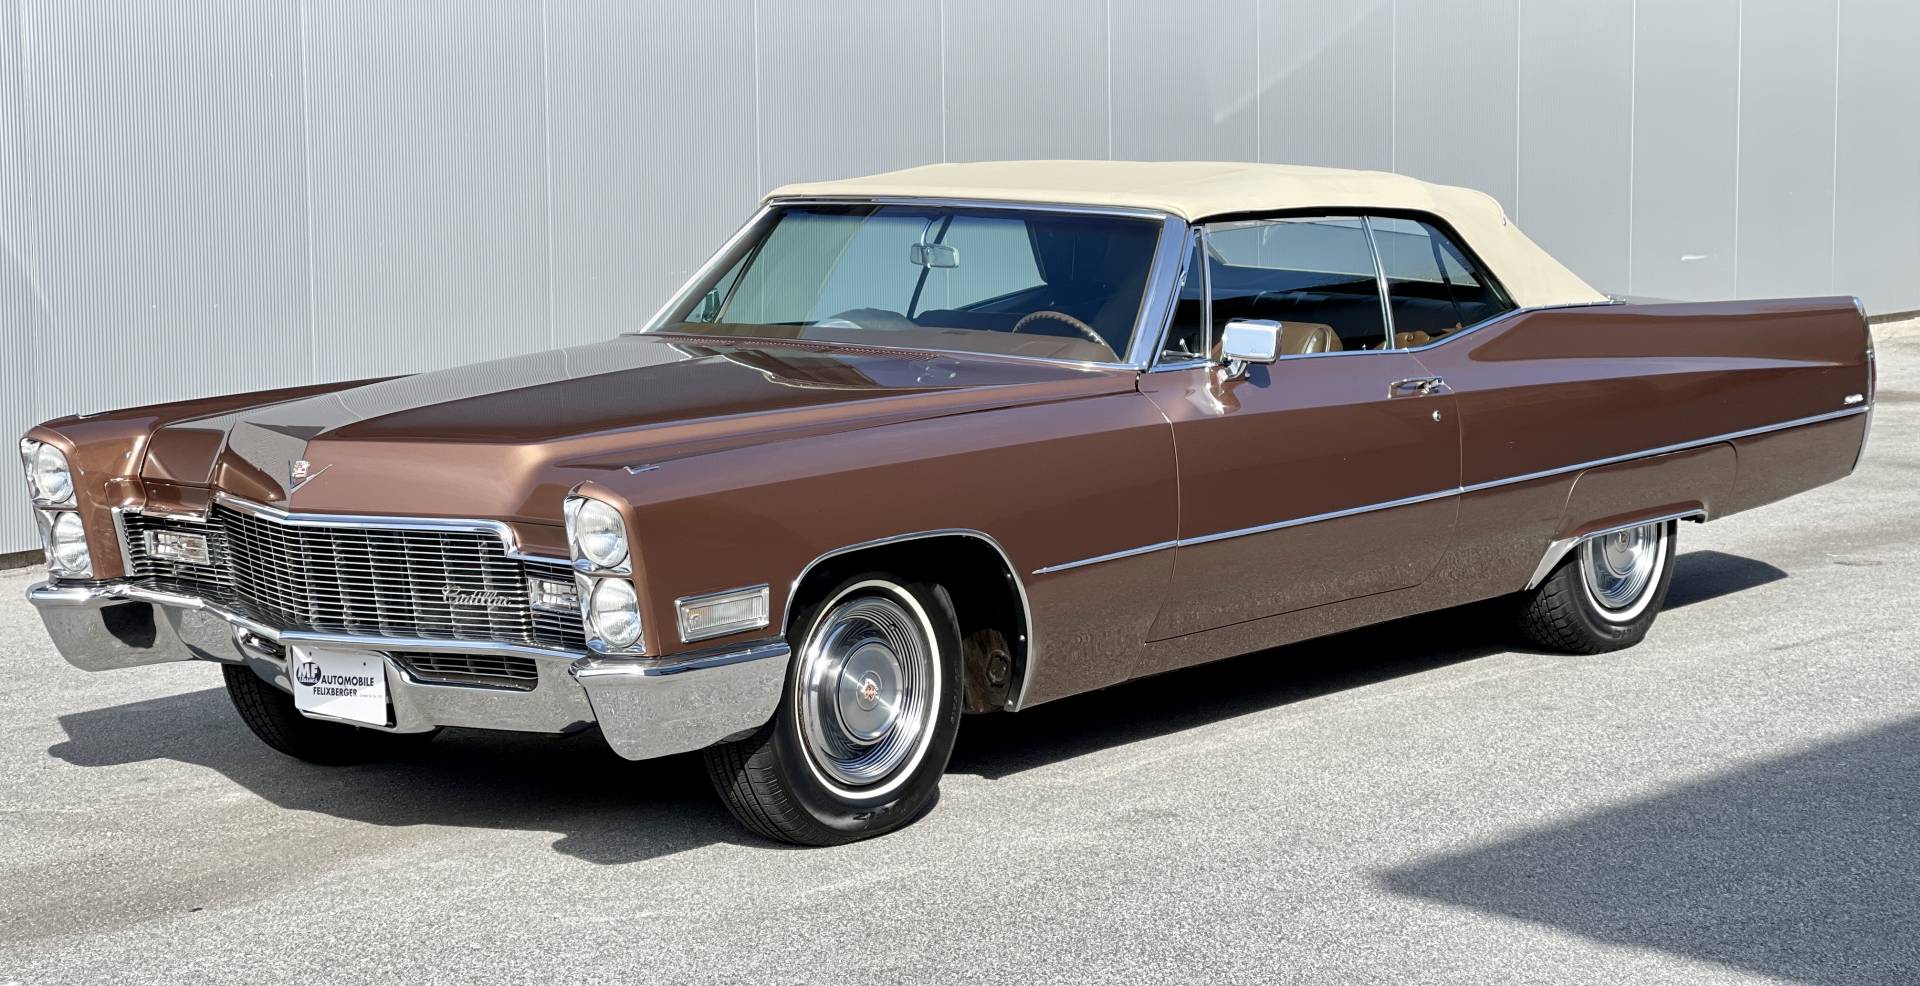 Cadillac Coup De Ville Cadillac DeVille Classic Cars for Sale - Classic Trader